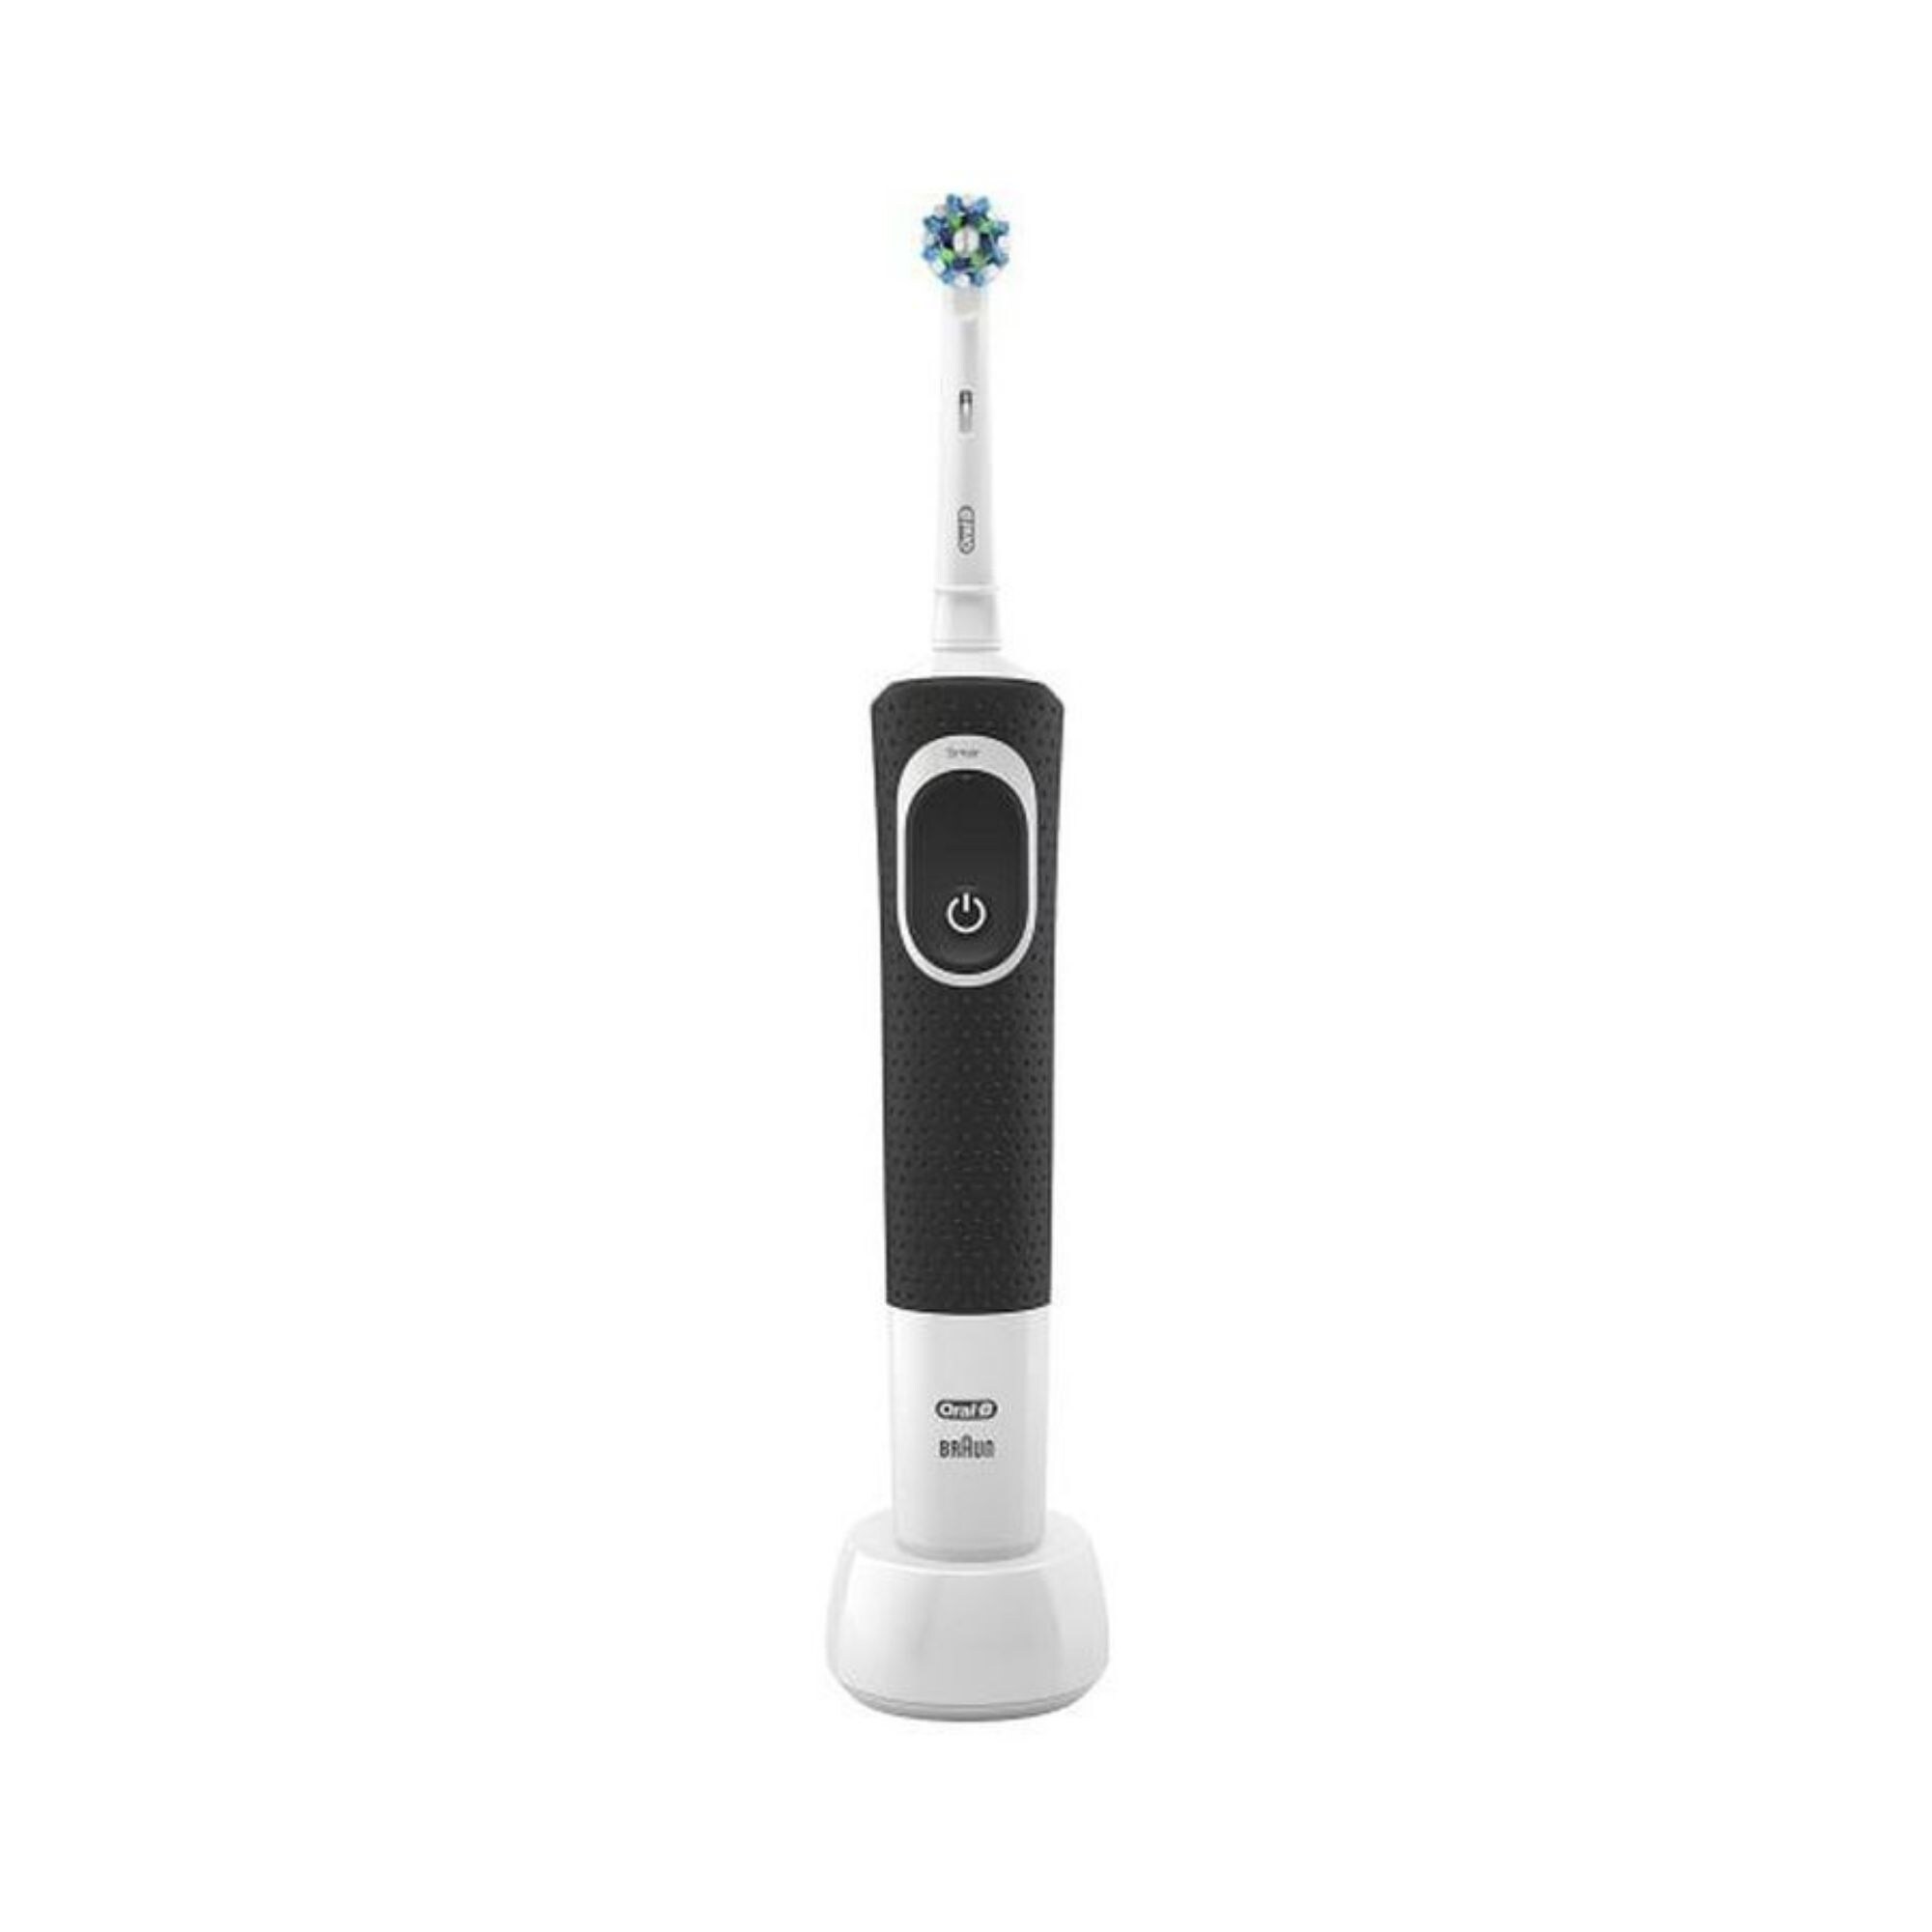 Oral-B Vitality Cross Action Electric Toothbrush, Black and White